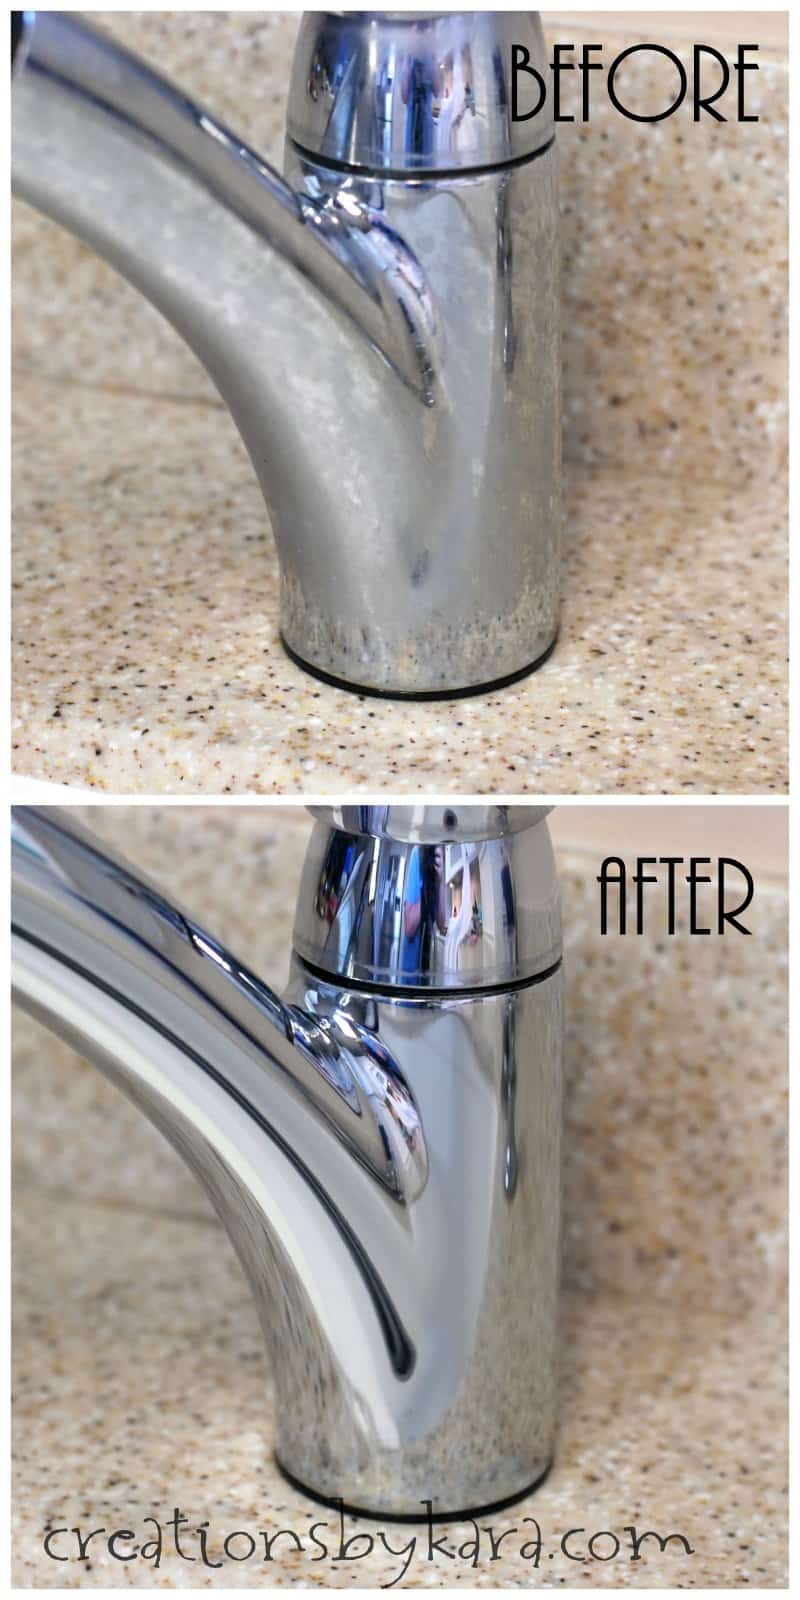 Discoloration on stainless steel faucet - cleaners came through and this is  how it was left. It was not like this before : r/CleaningTips